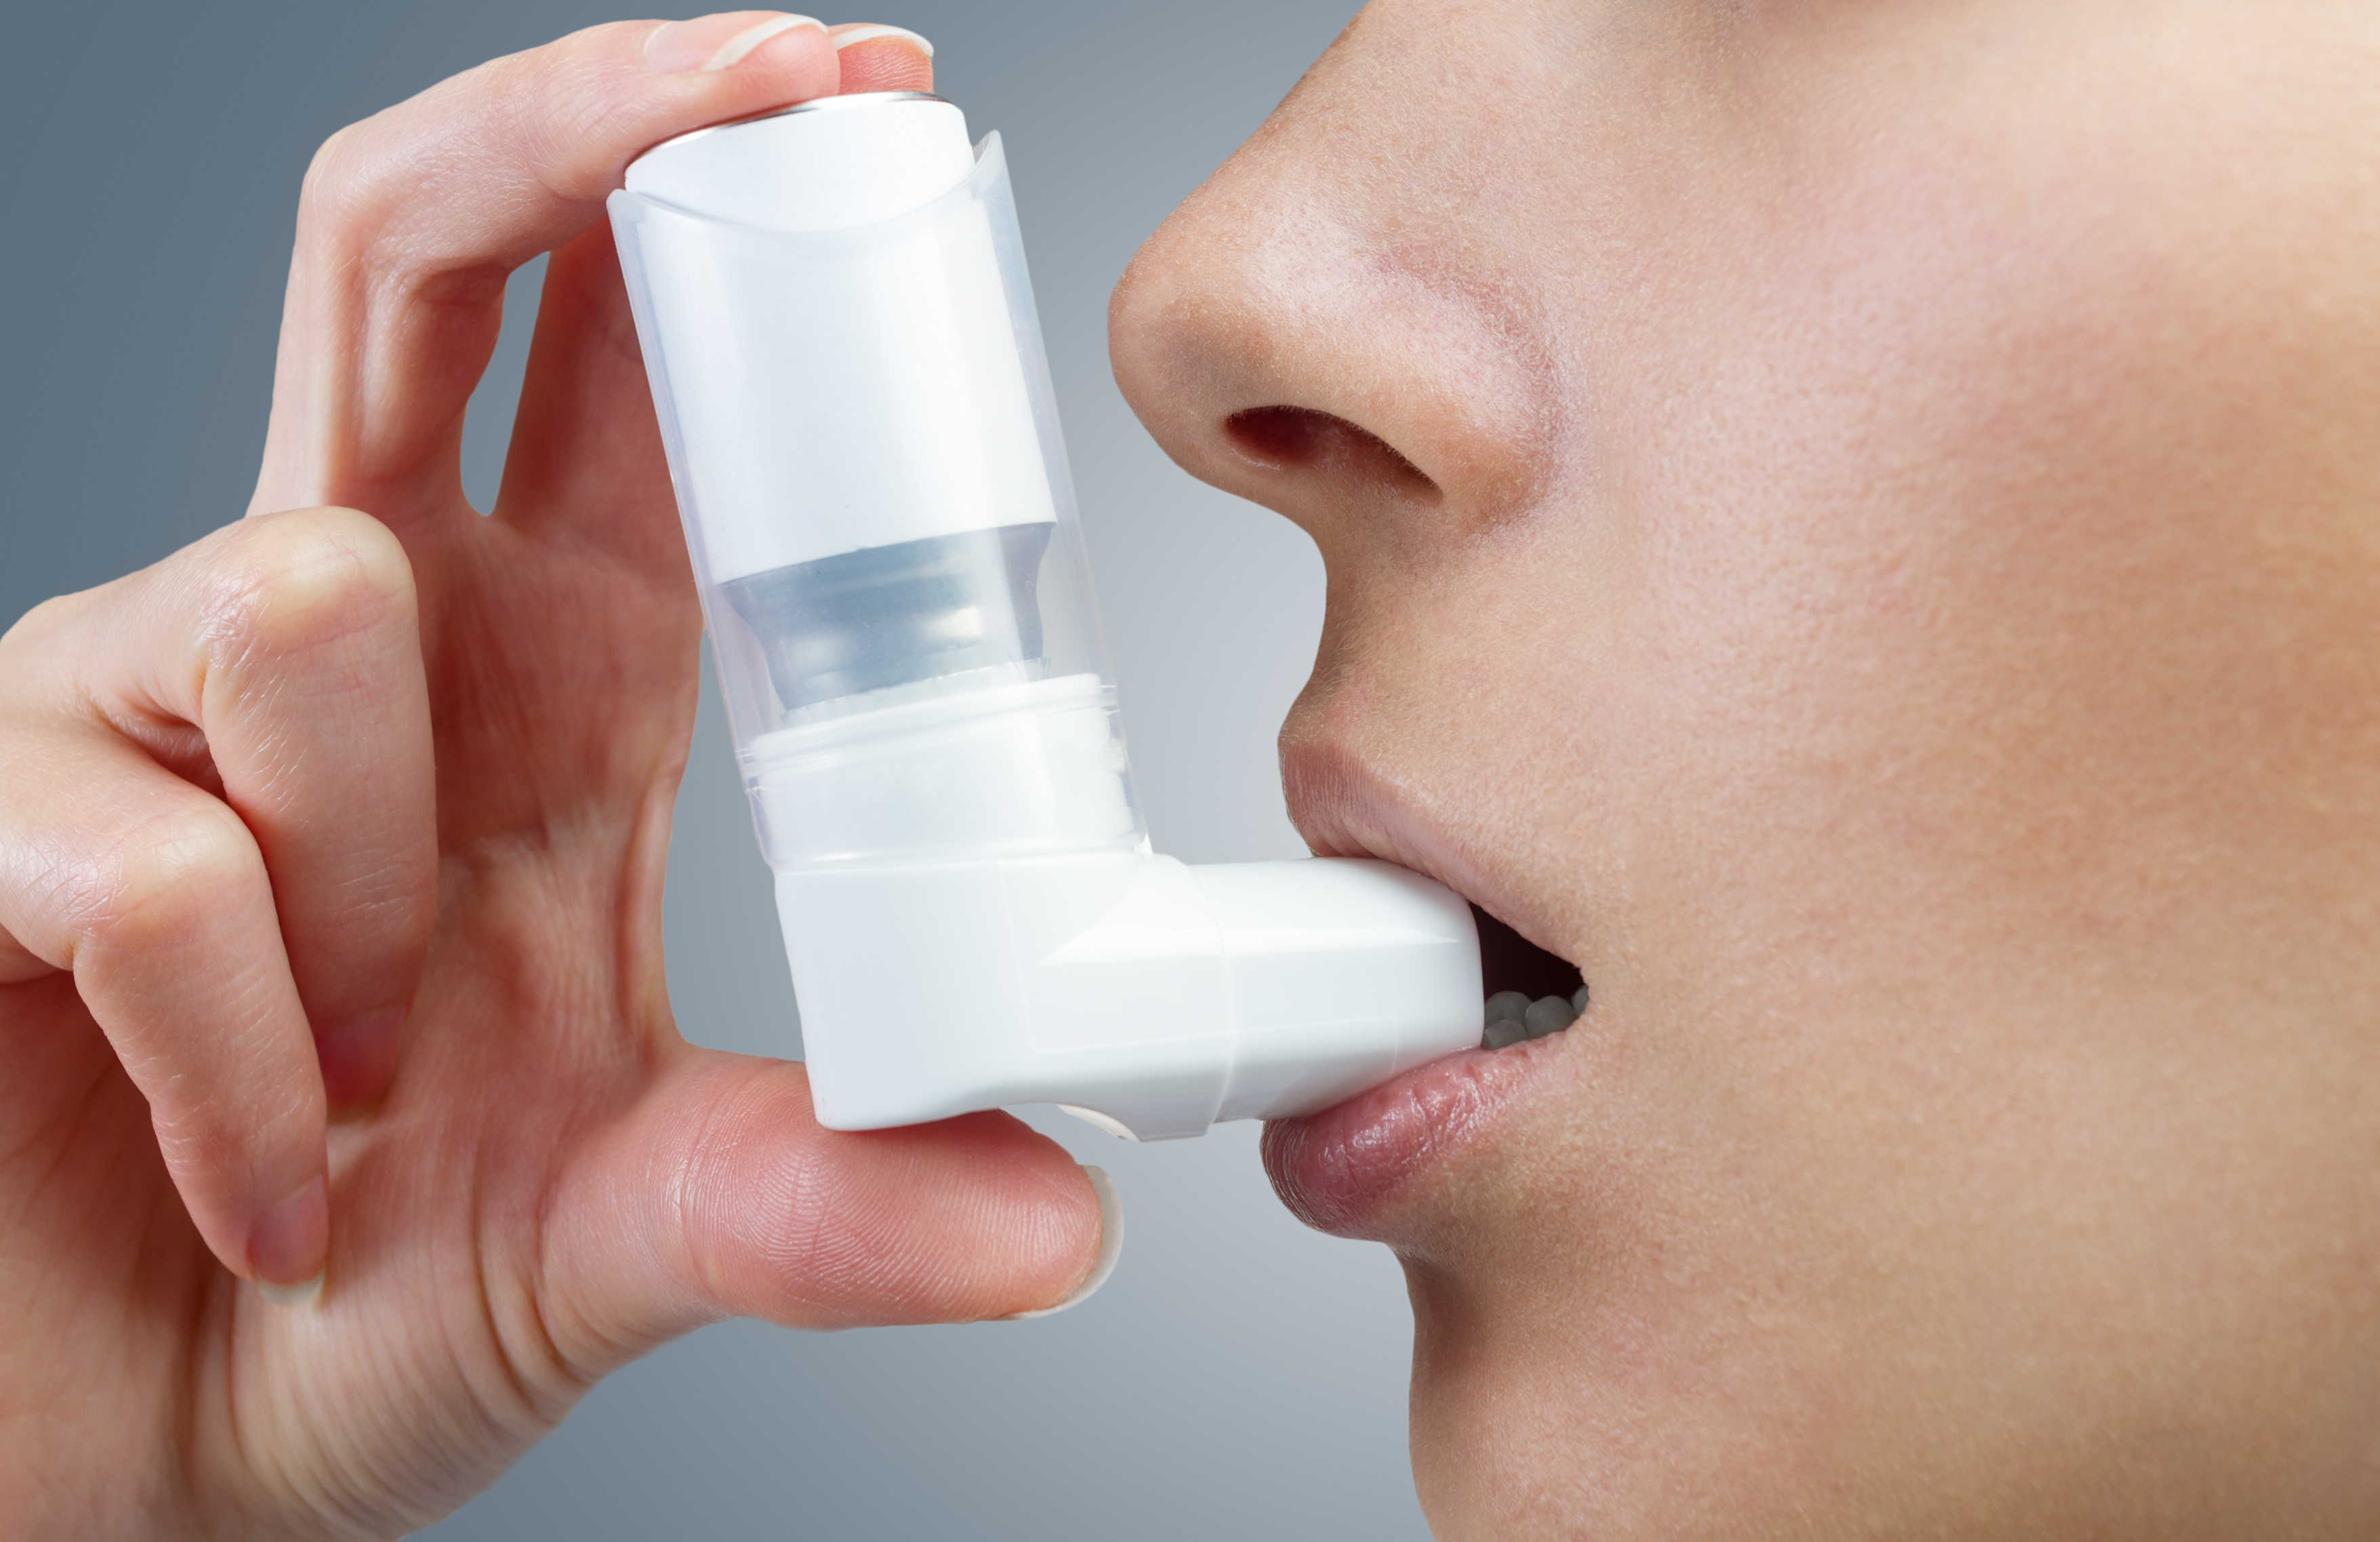 Signs and Symptoms of Asthma Urgent Medical Care